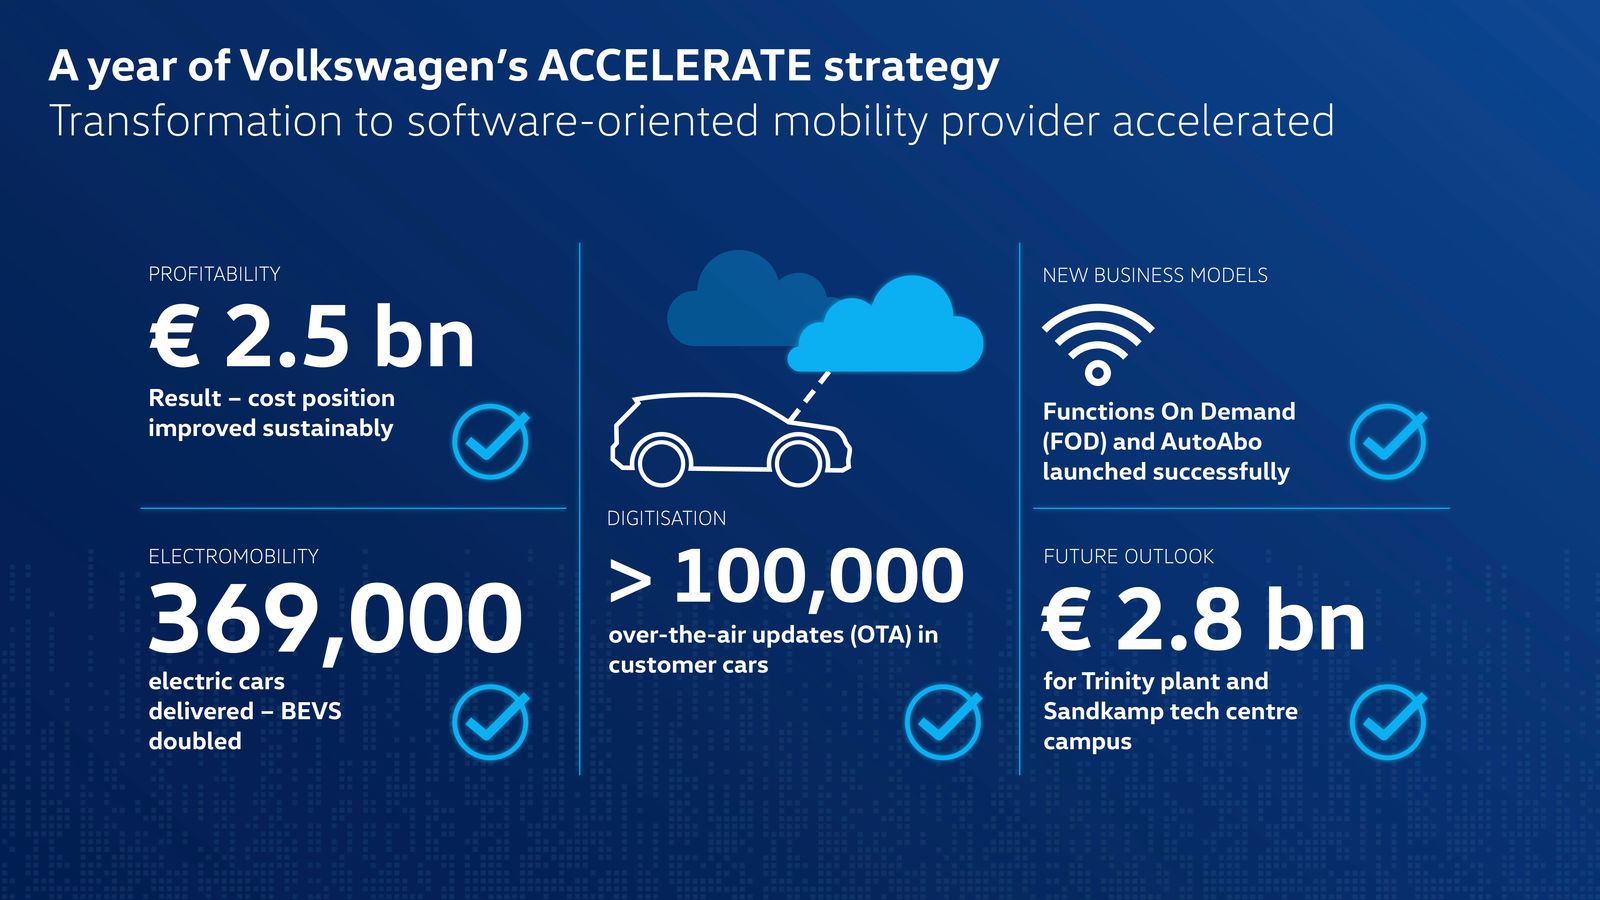 One year of ACCELERATE strategy: Volkswagen strengthens efficiency and speeds up transformation